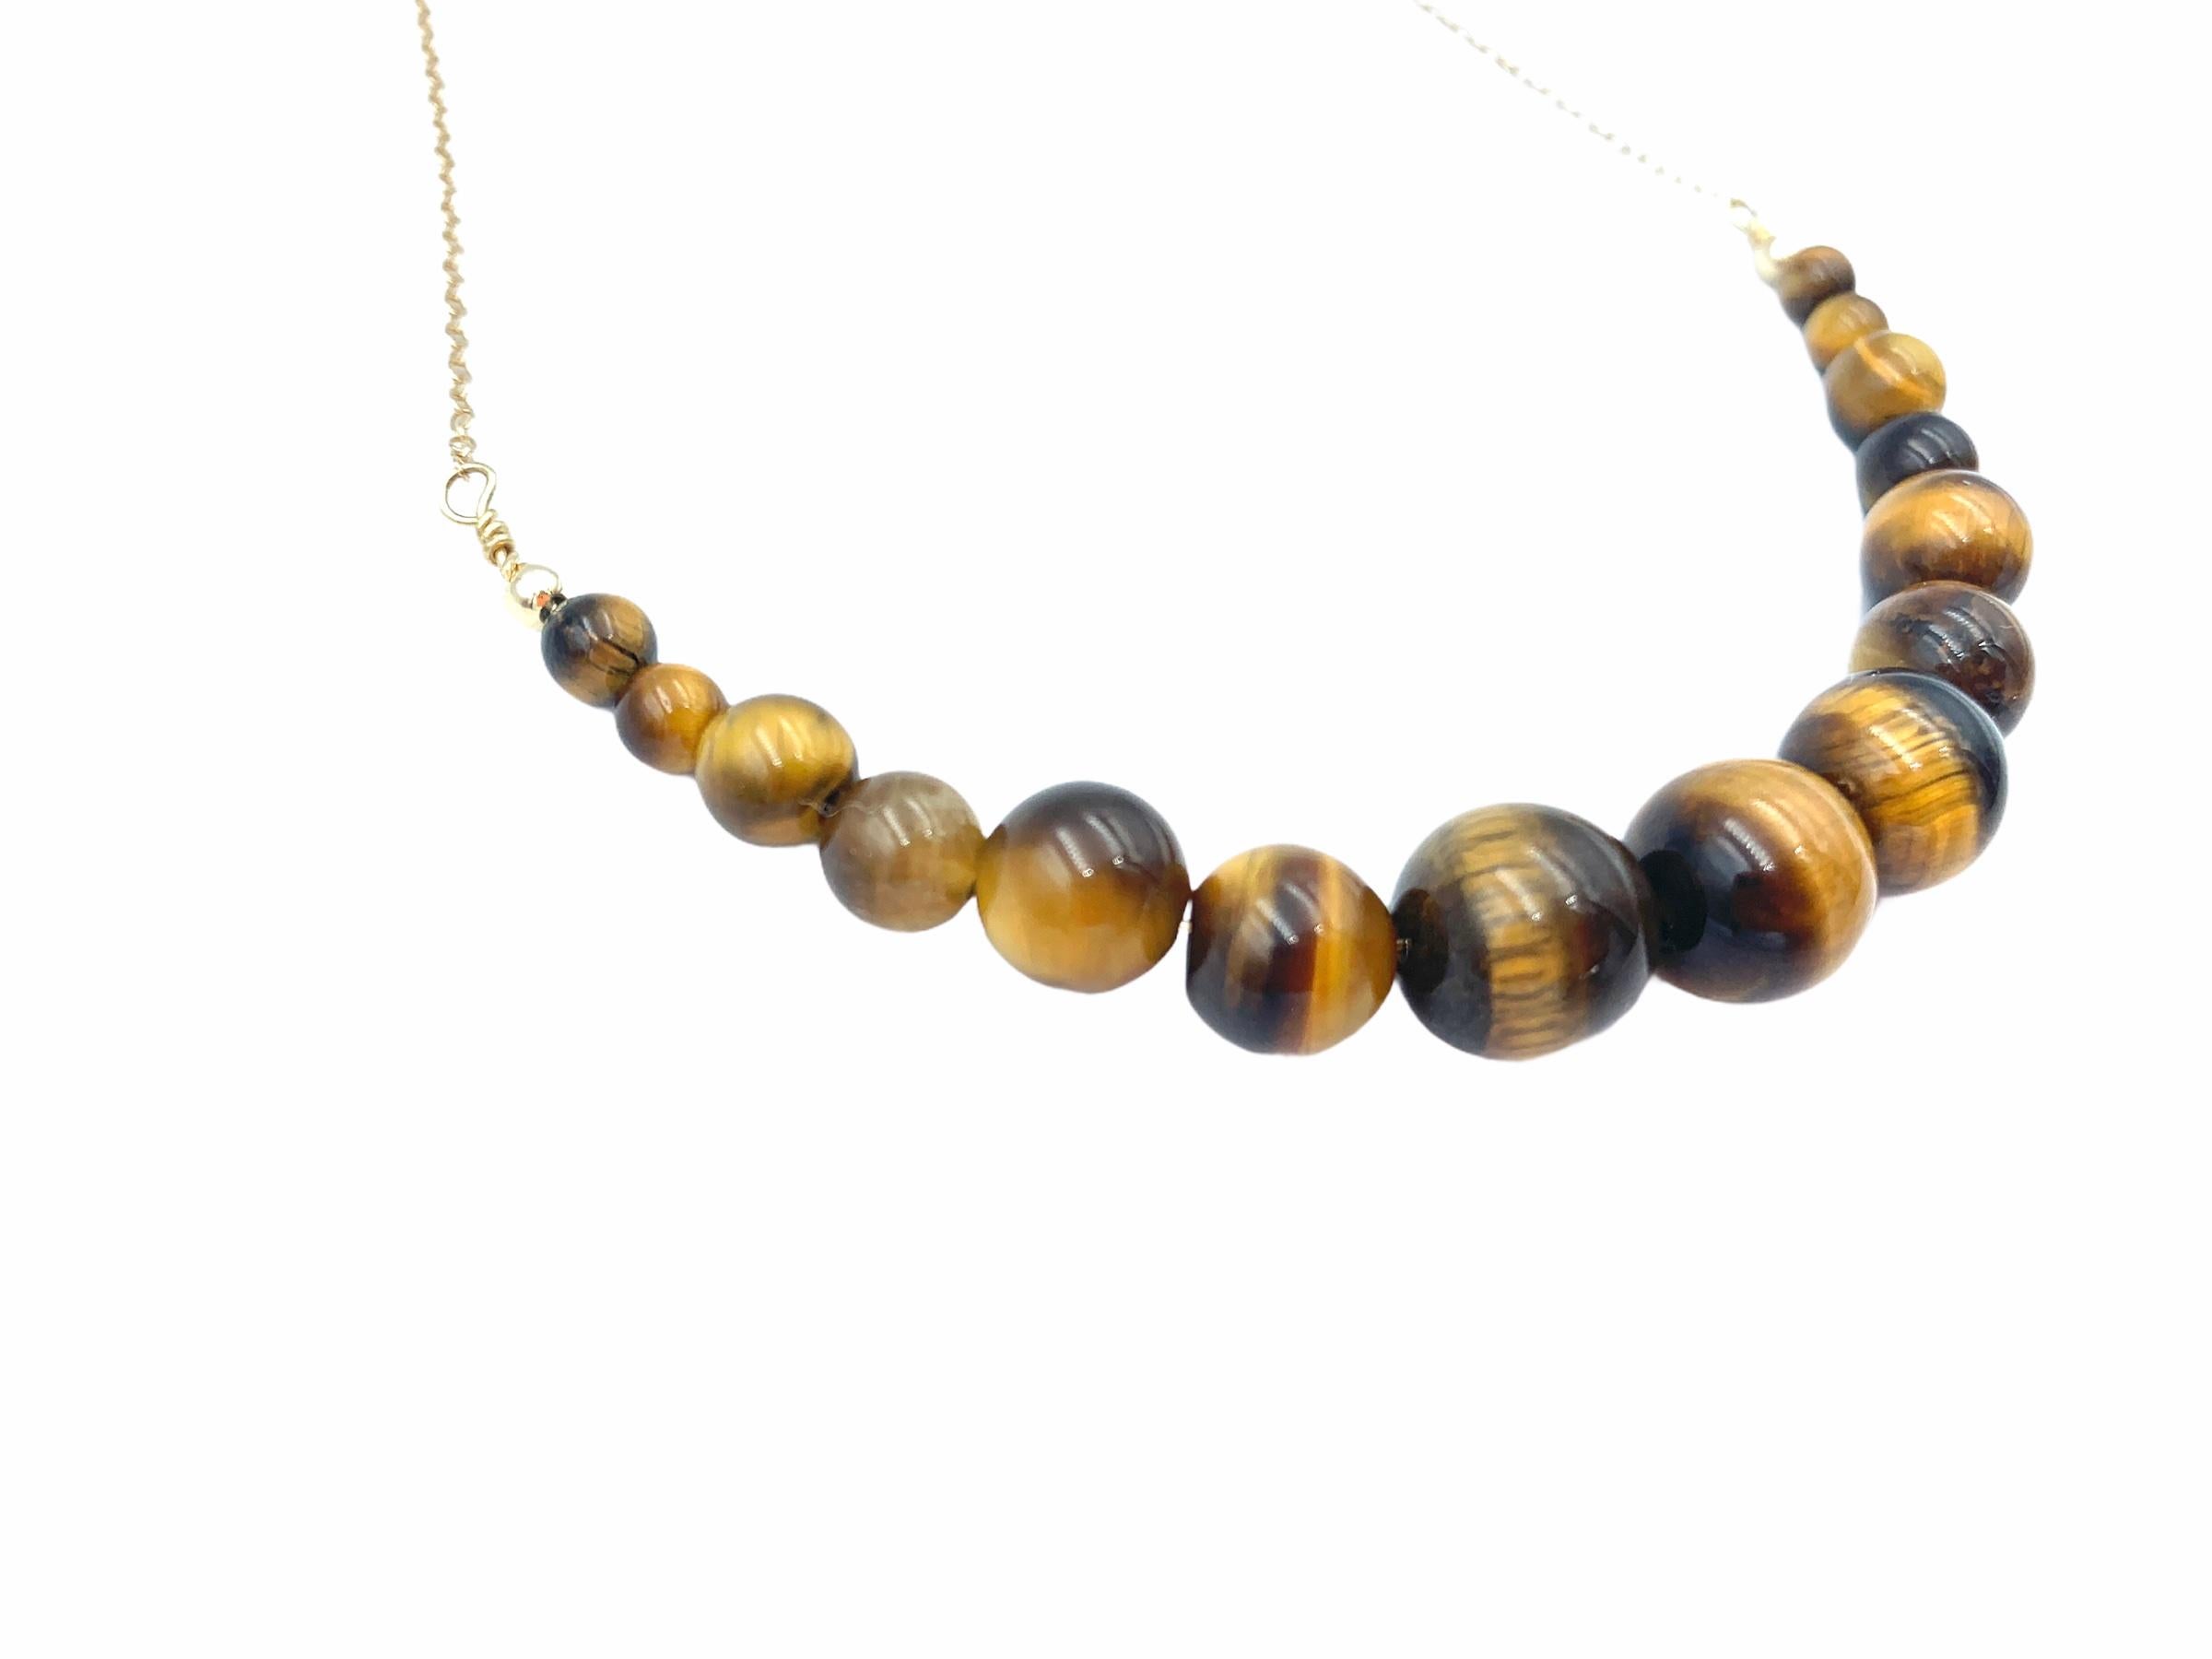 Hand made using 14 carat Yellow Gold, the suspended Tiger's Eye beads are threaded together with a solid gold wire and graduated onto a delicate 1.3 mm cable chain. The 3 centre beads mesmerising bands are 10 mm in size, 8 mm the two following, 6 mm